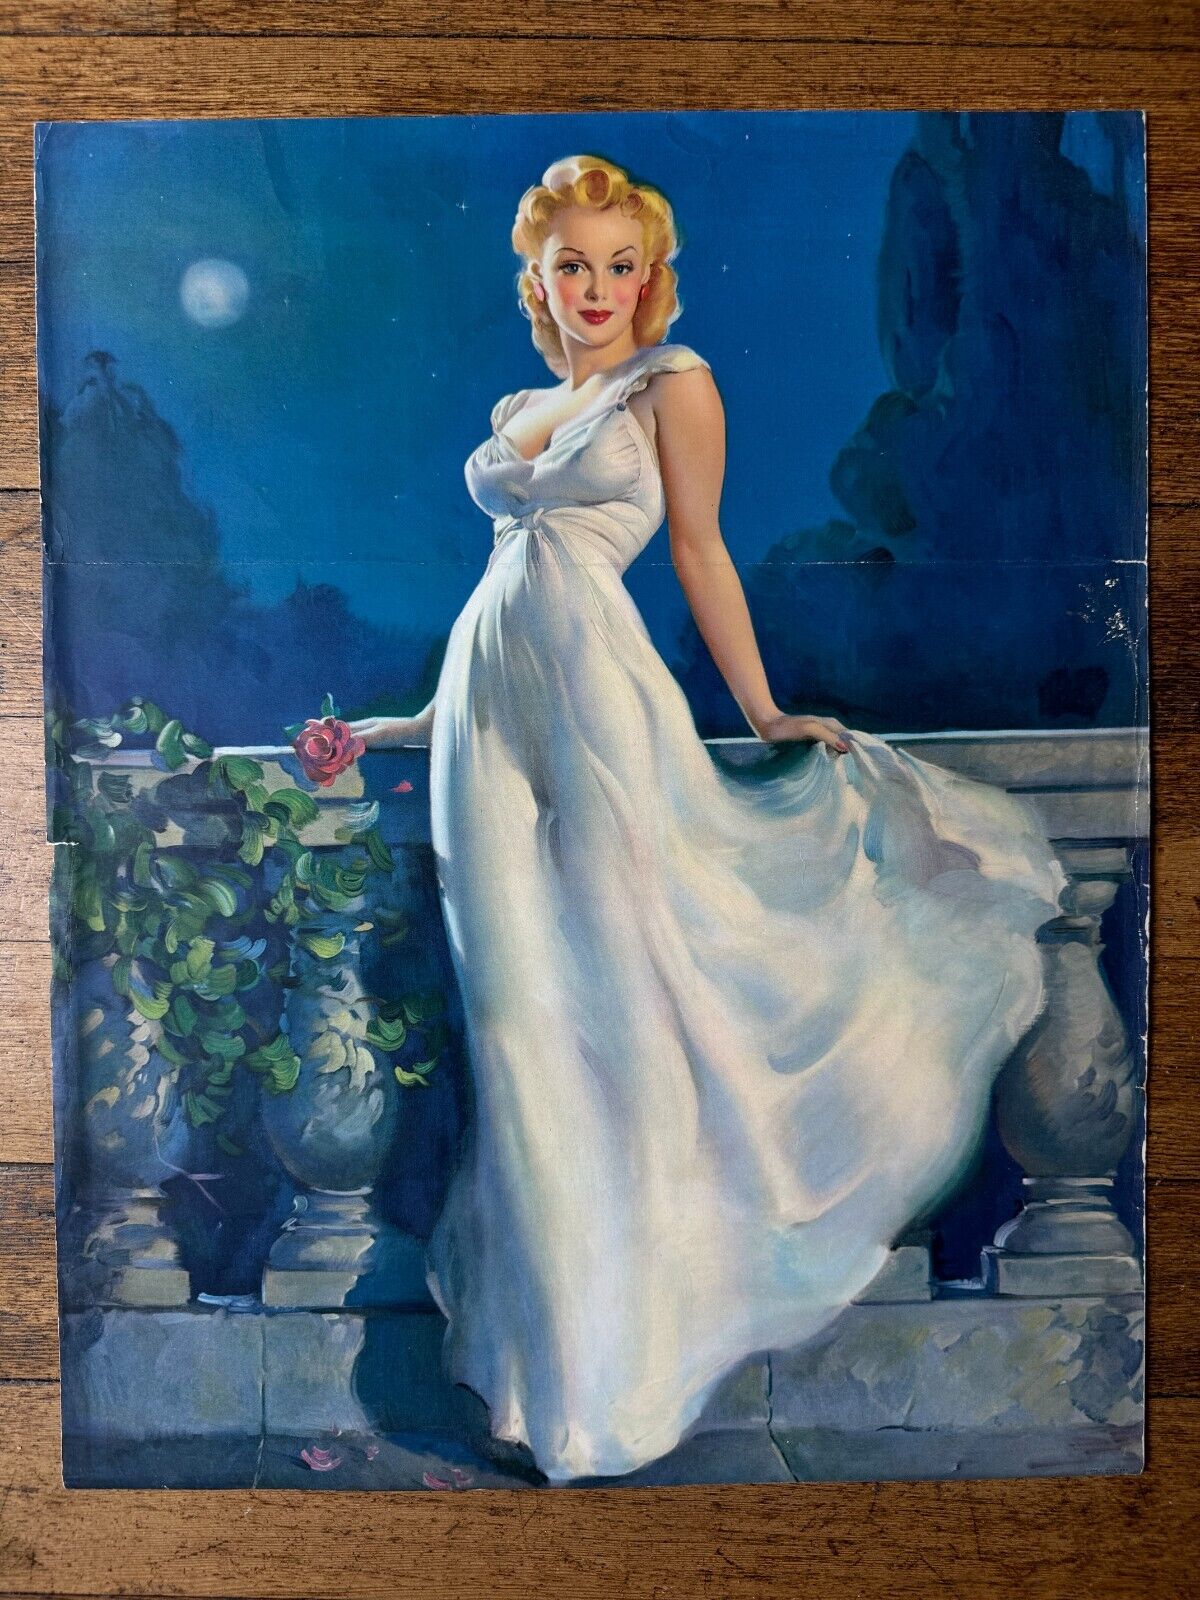 Gorgeous 1943 Pinup Girl Picture Dream Girl by Gil Elvgren